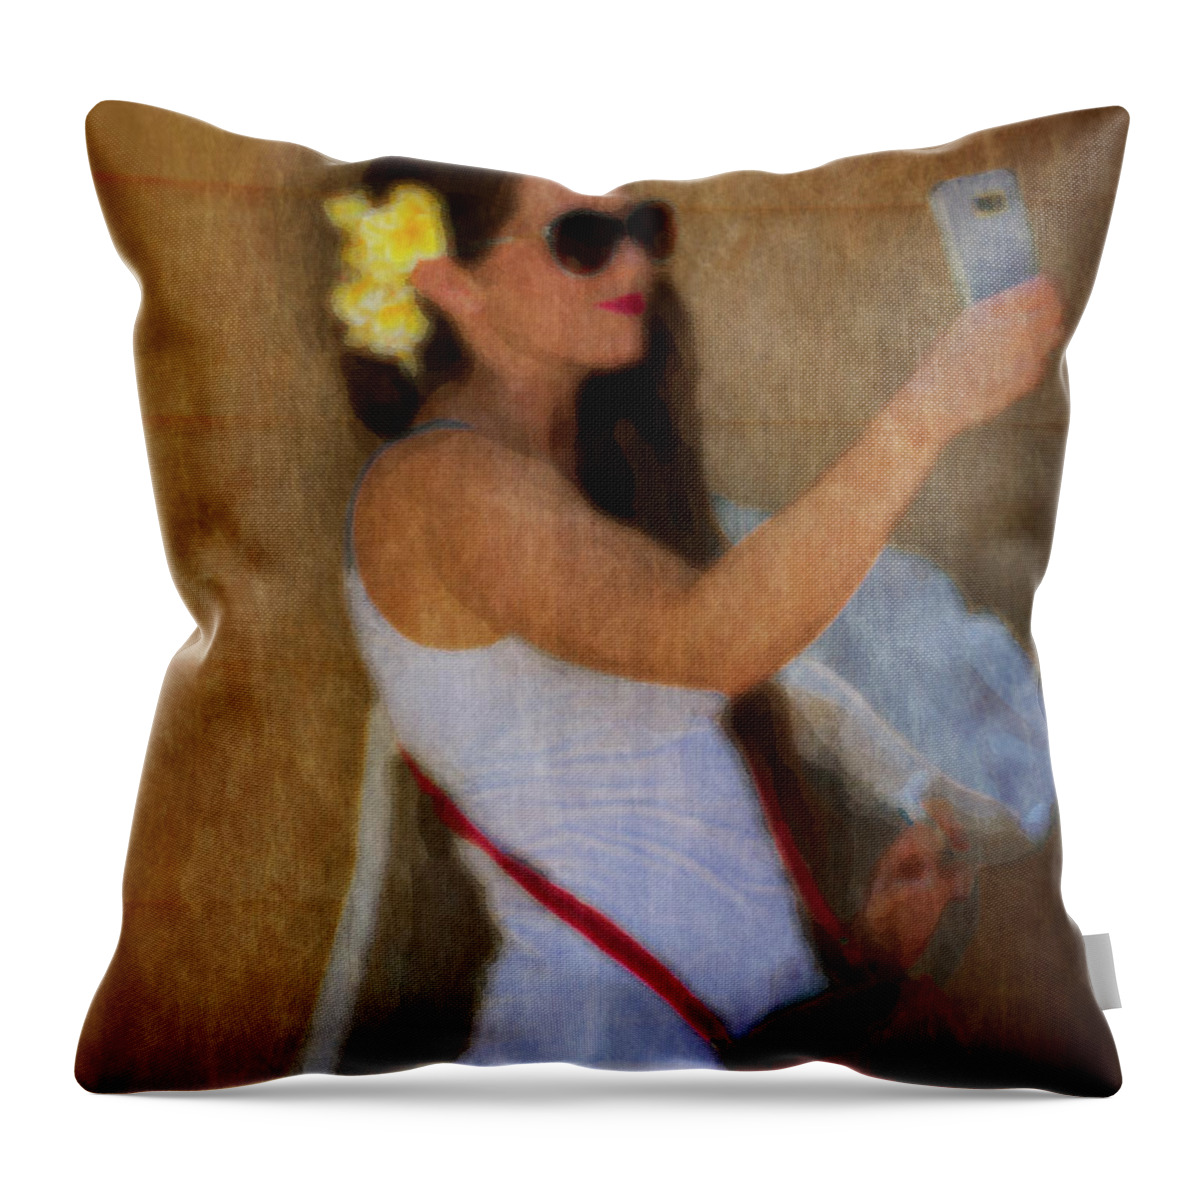 Camera Throw Pillow featuring the photograph Selfie by Bob Zuber